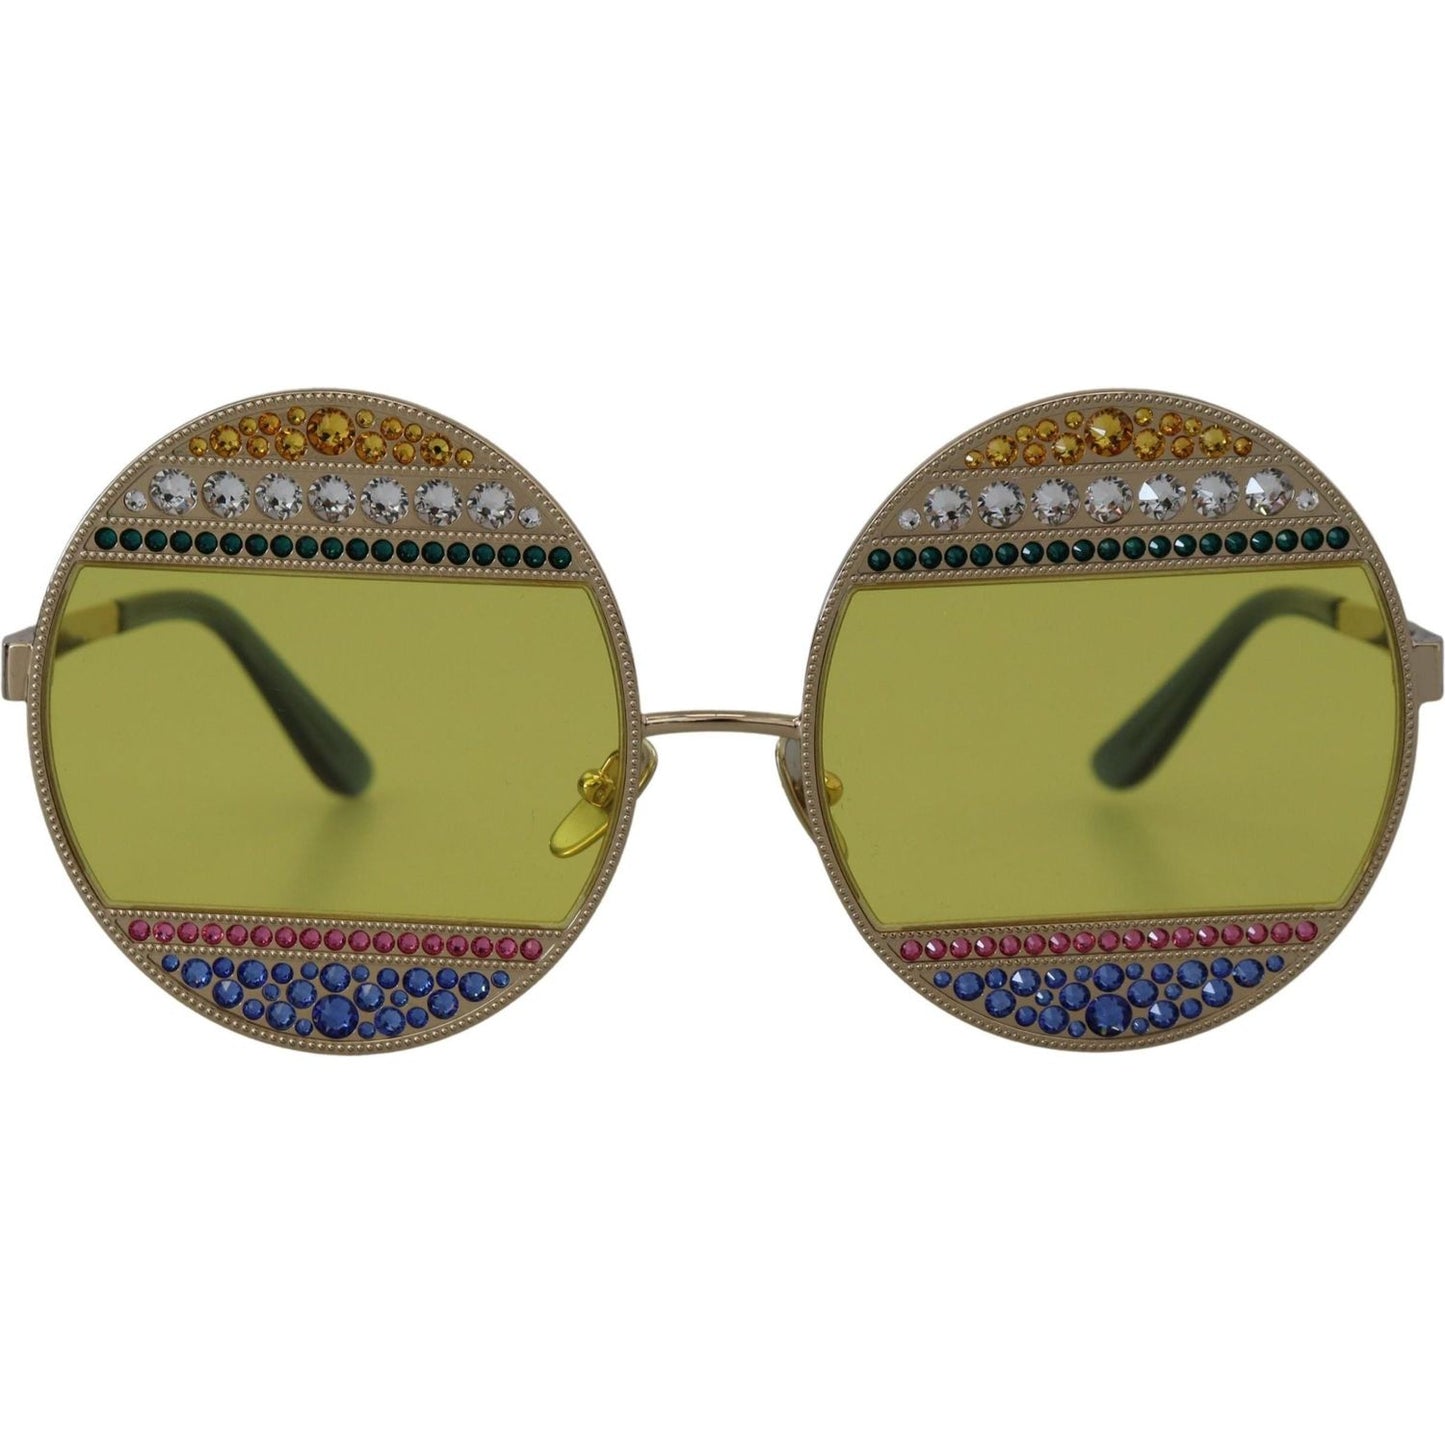 Dolce & Gabbana Crystal Embellished Gold Oval Sunglasses gold-oval-metal-crystals-shades-dg2209b-sunglasses IMG_5280-scaled-1f8343c7-e57.jpg